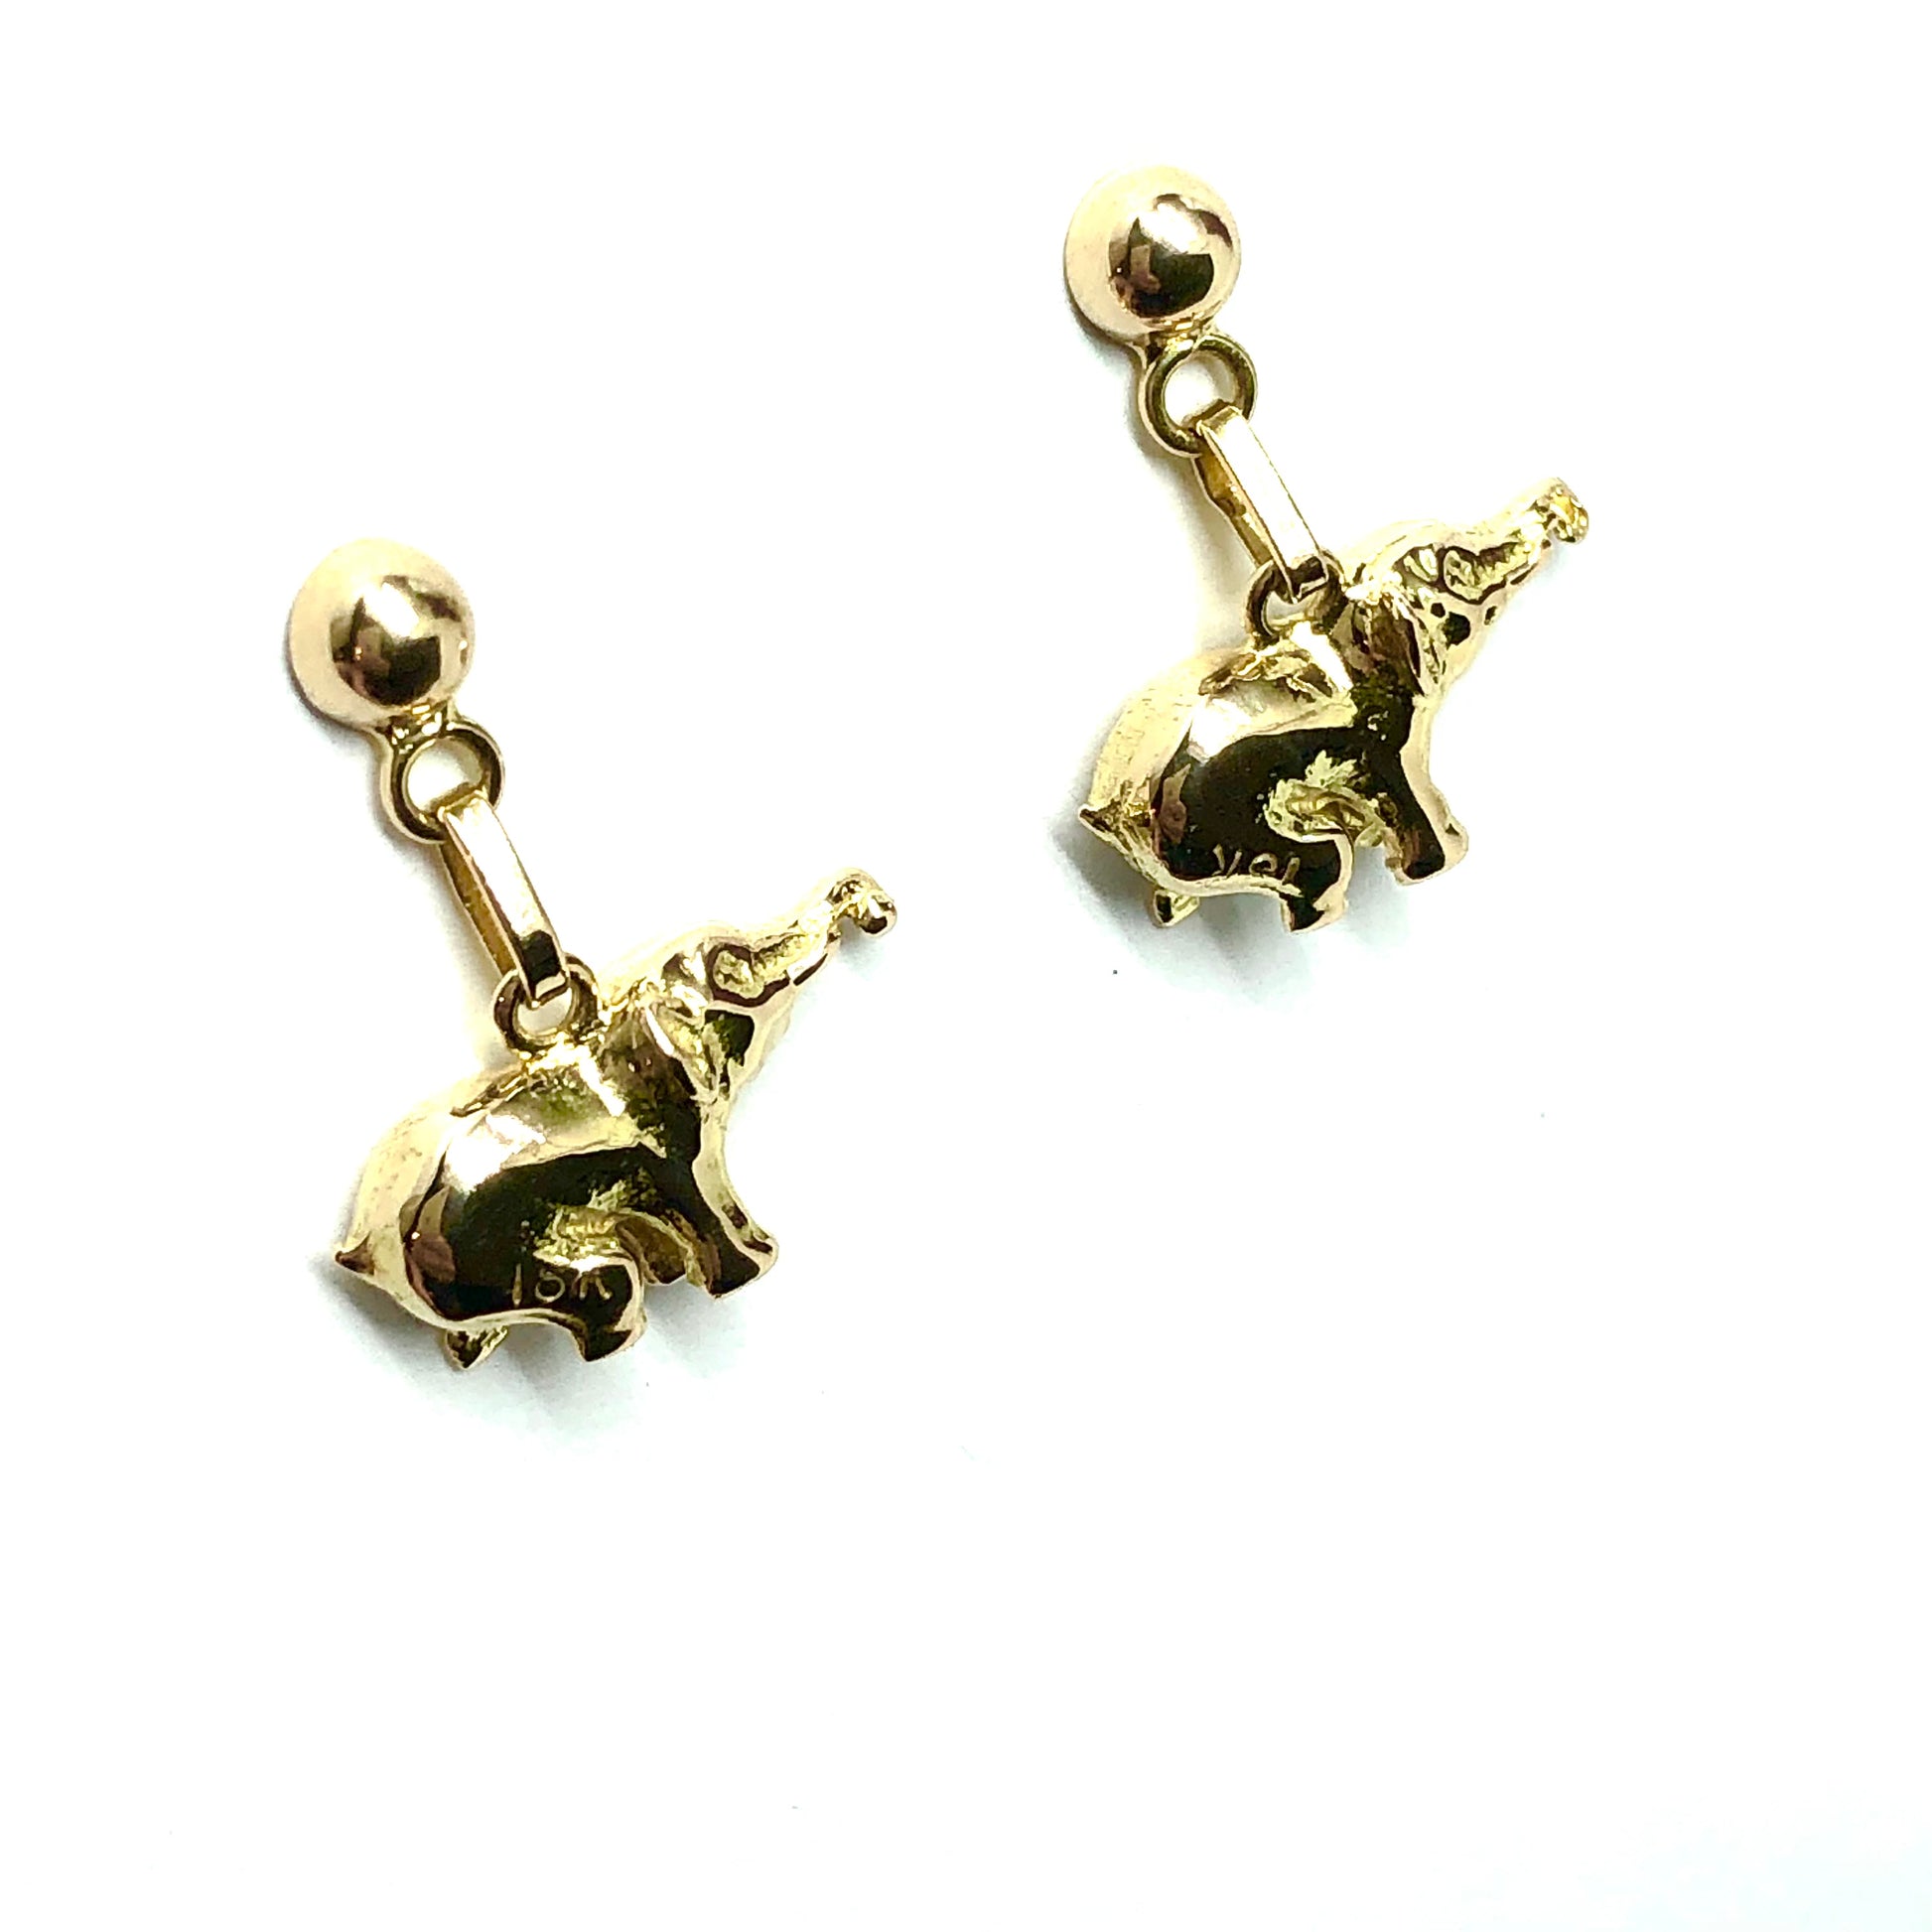 Jewelry used - Solid 18k Gold Elephant Charm Style Dangle Earrings